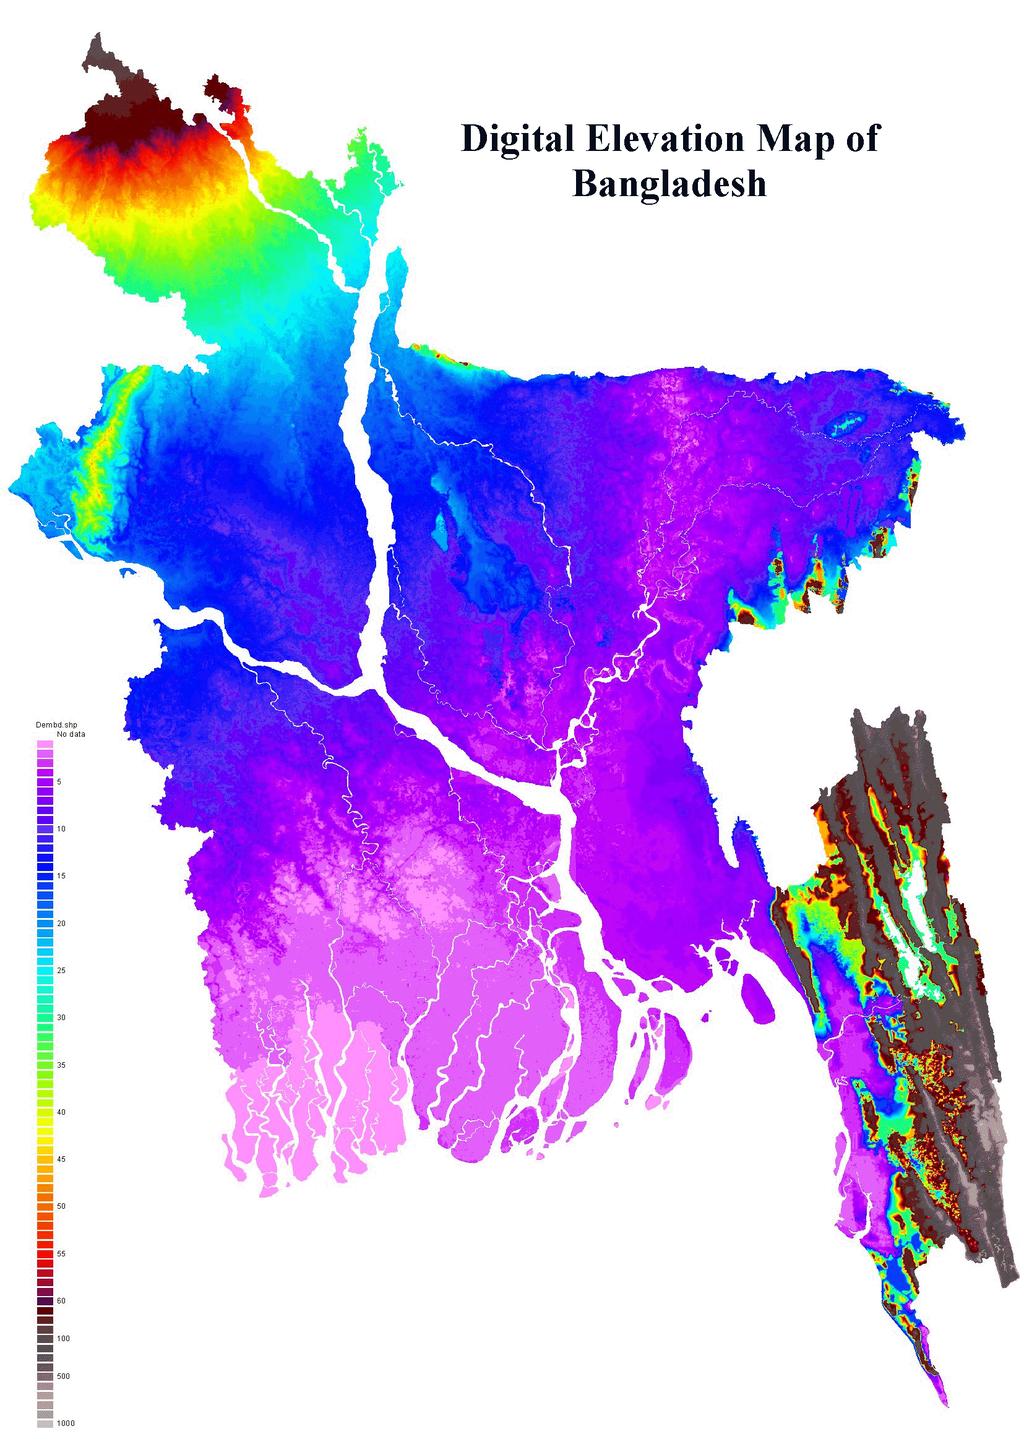 Digital Elevation Model of Bangladesh Bangladesh Delta includes the entire country Land